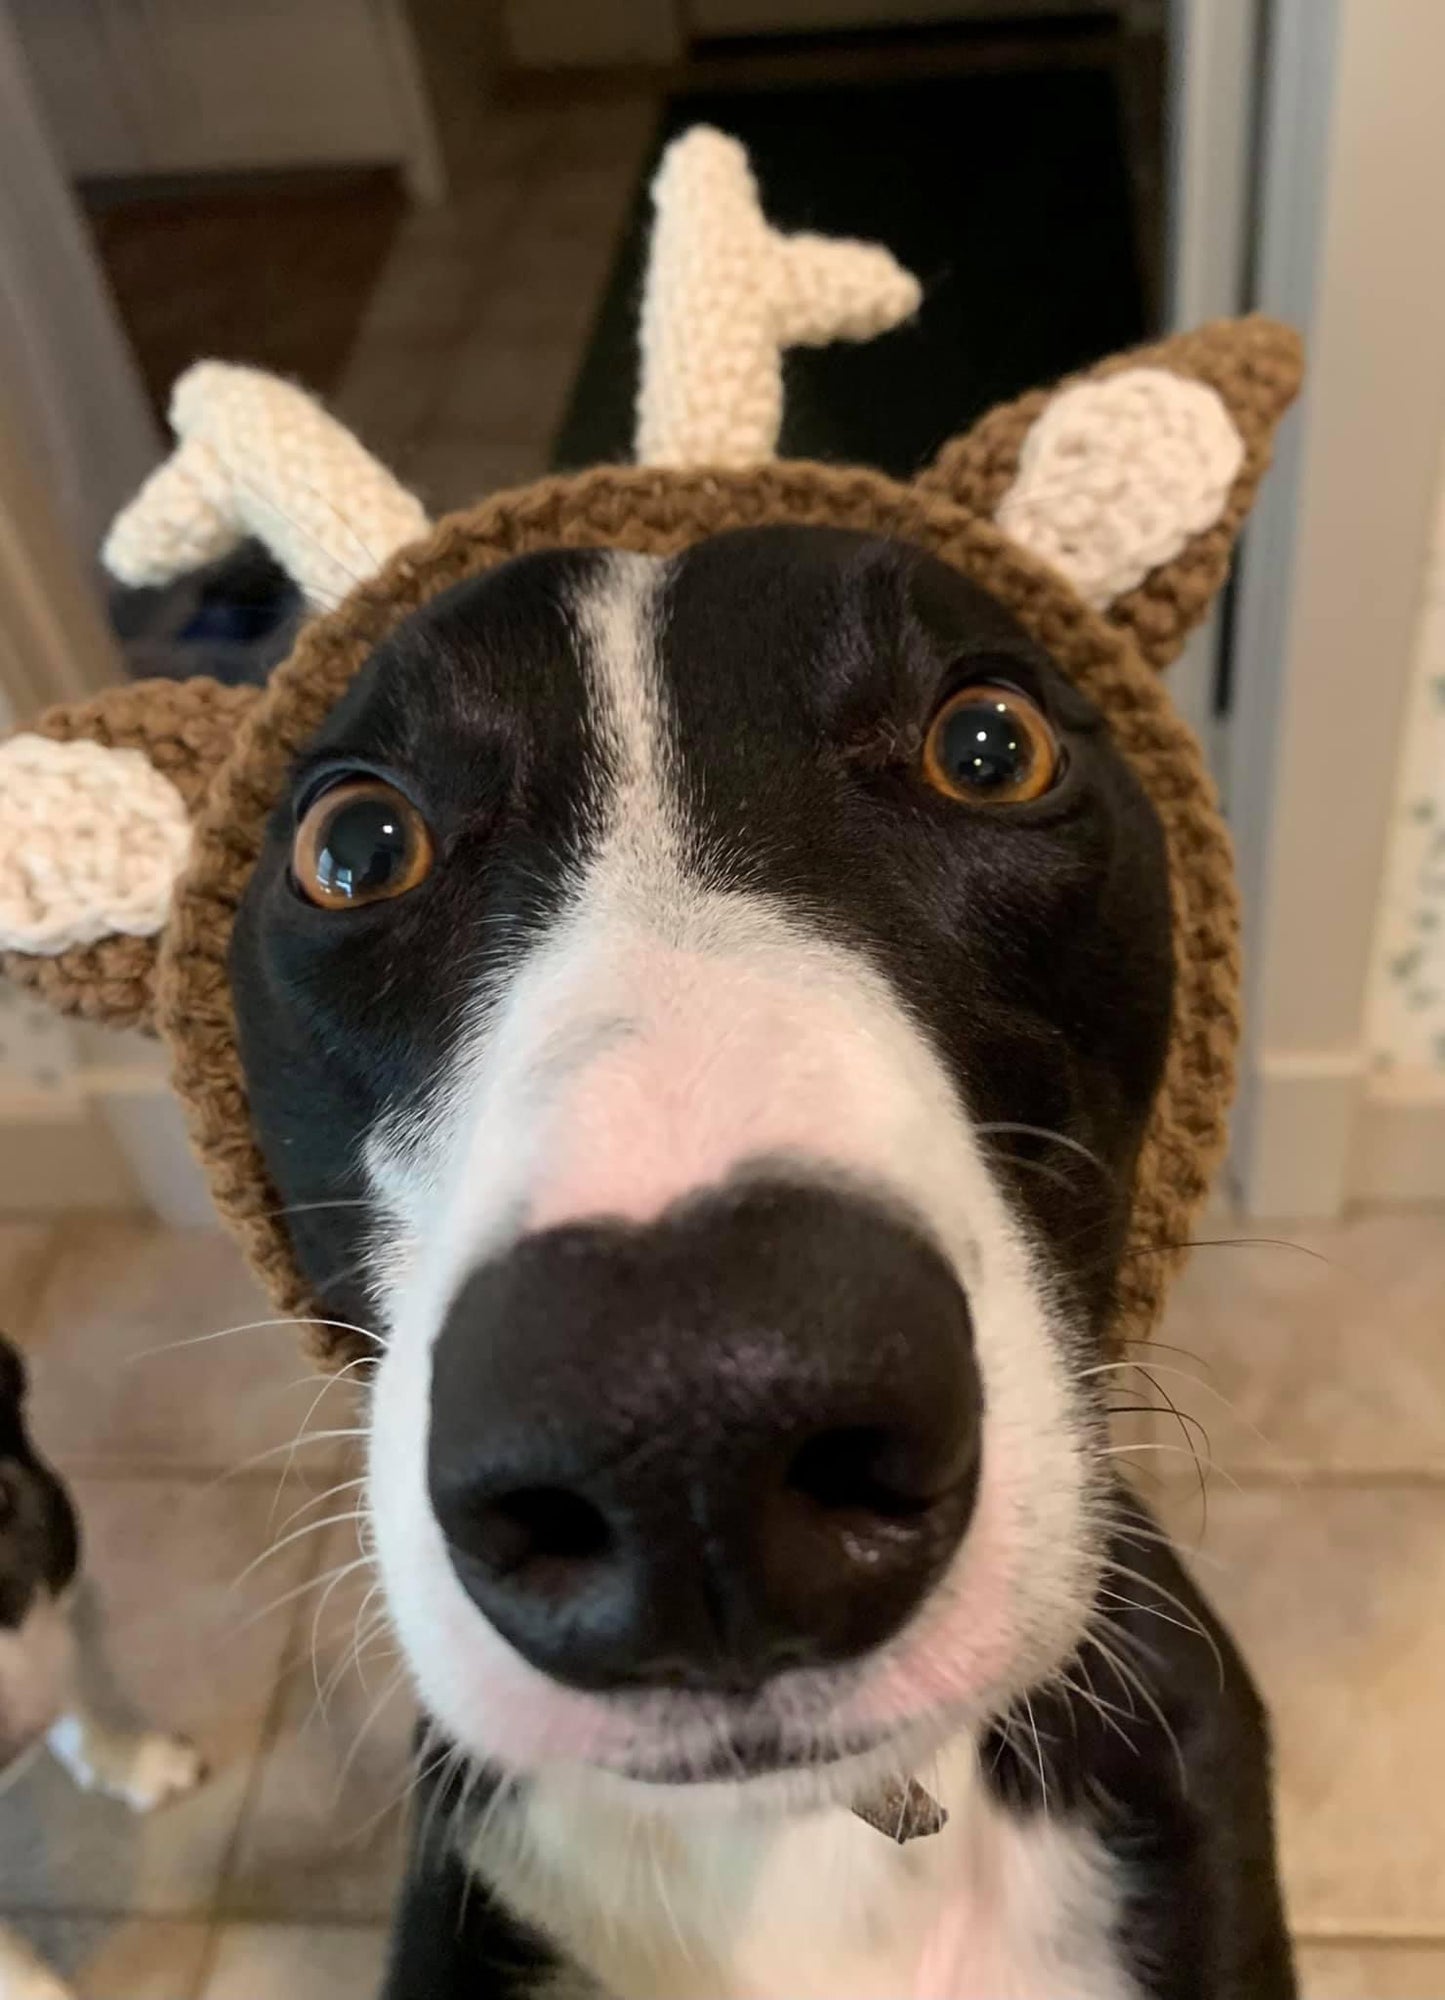 Knitted Reindeer Hat